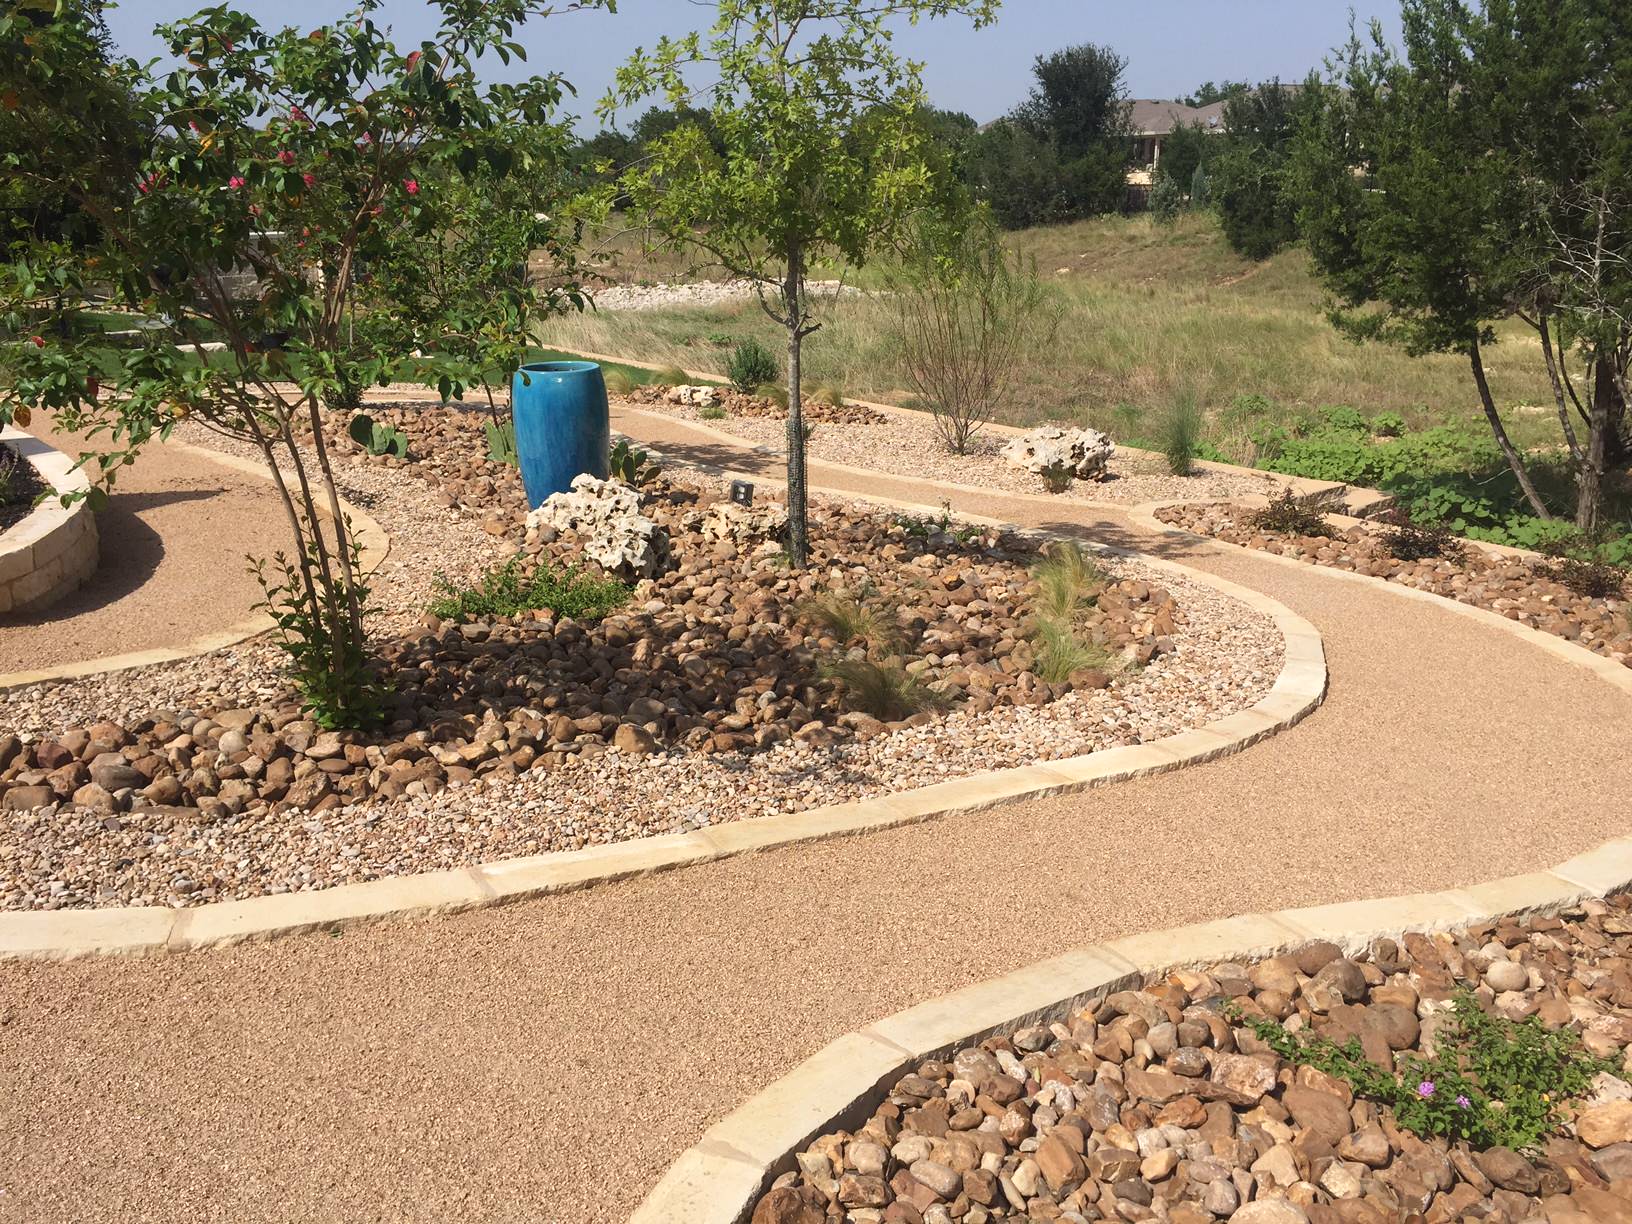 Xeriscape w/ Decomposed Granite Pathway & water Feature